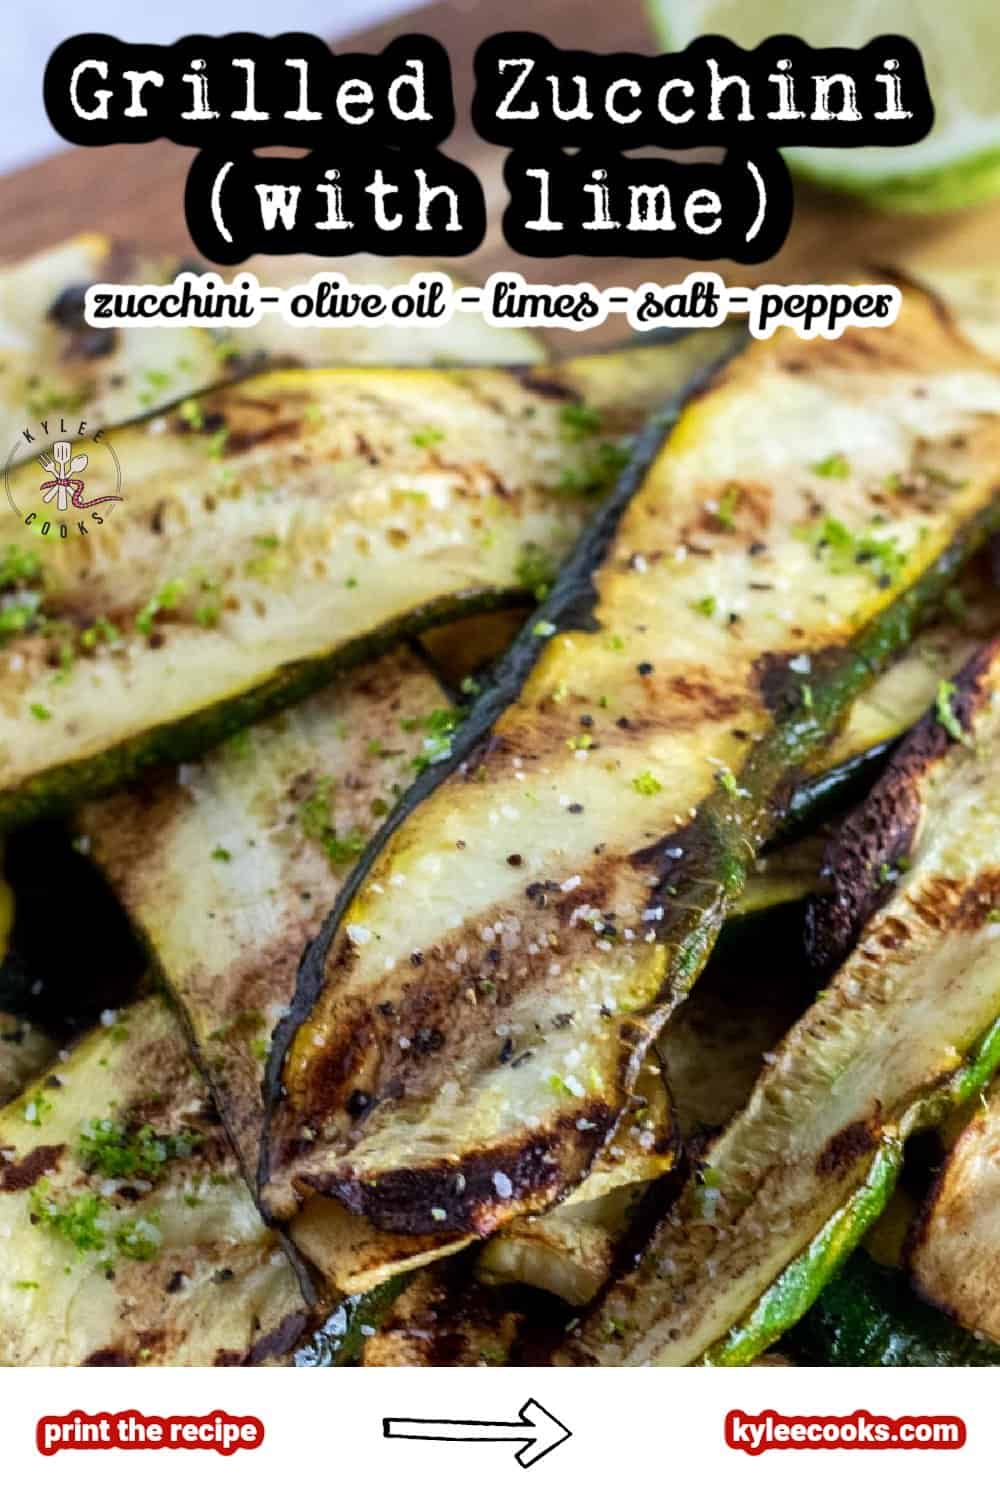 grilled zucchini on a chopping board, with text overlay.